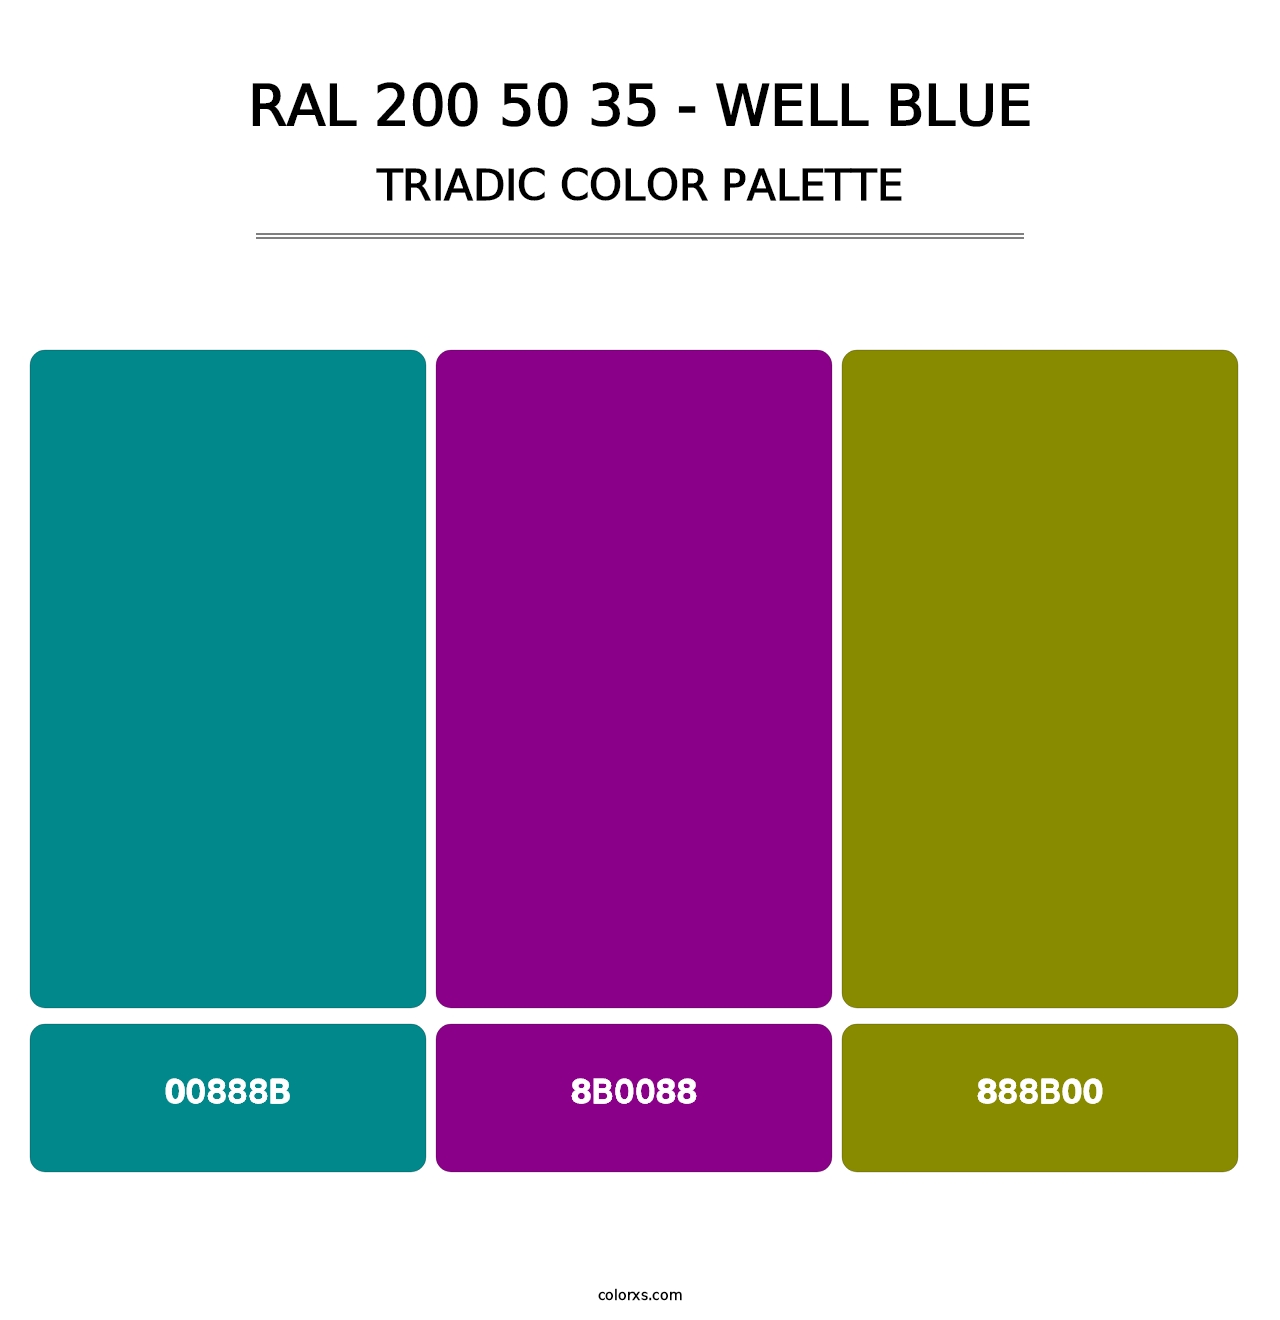 RAL 200 50 35 - Well Blue - Triadic Color Palette